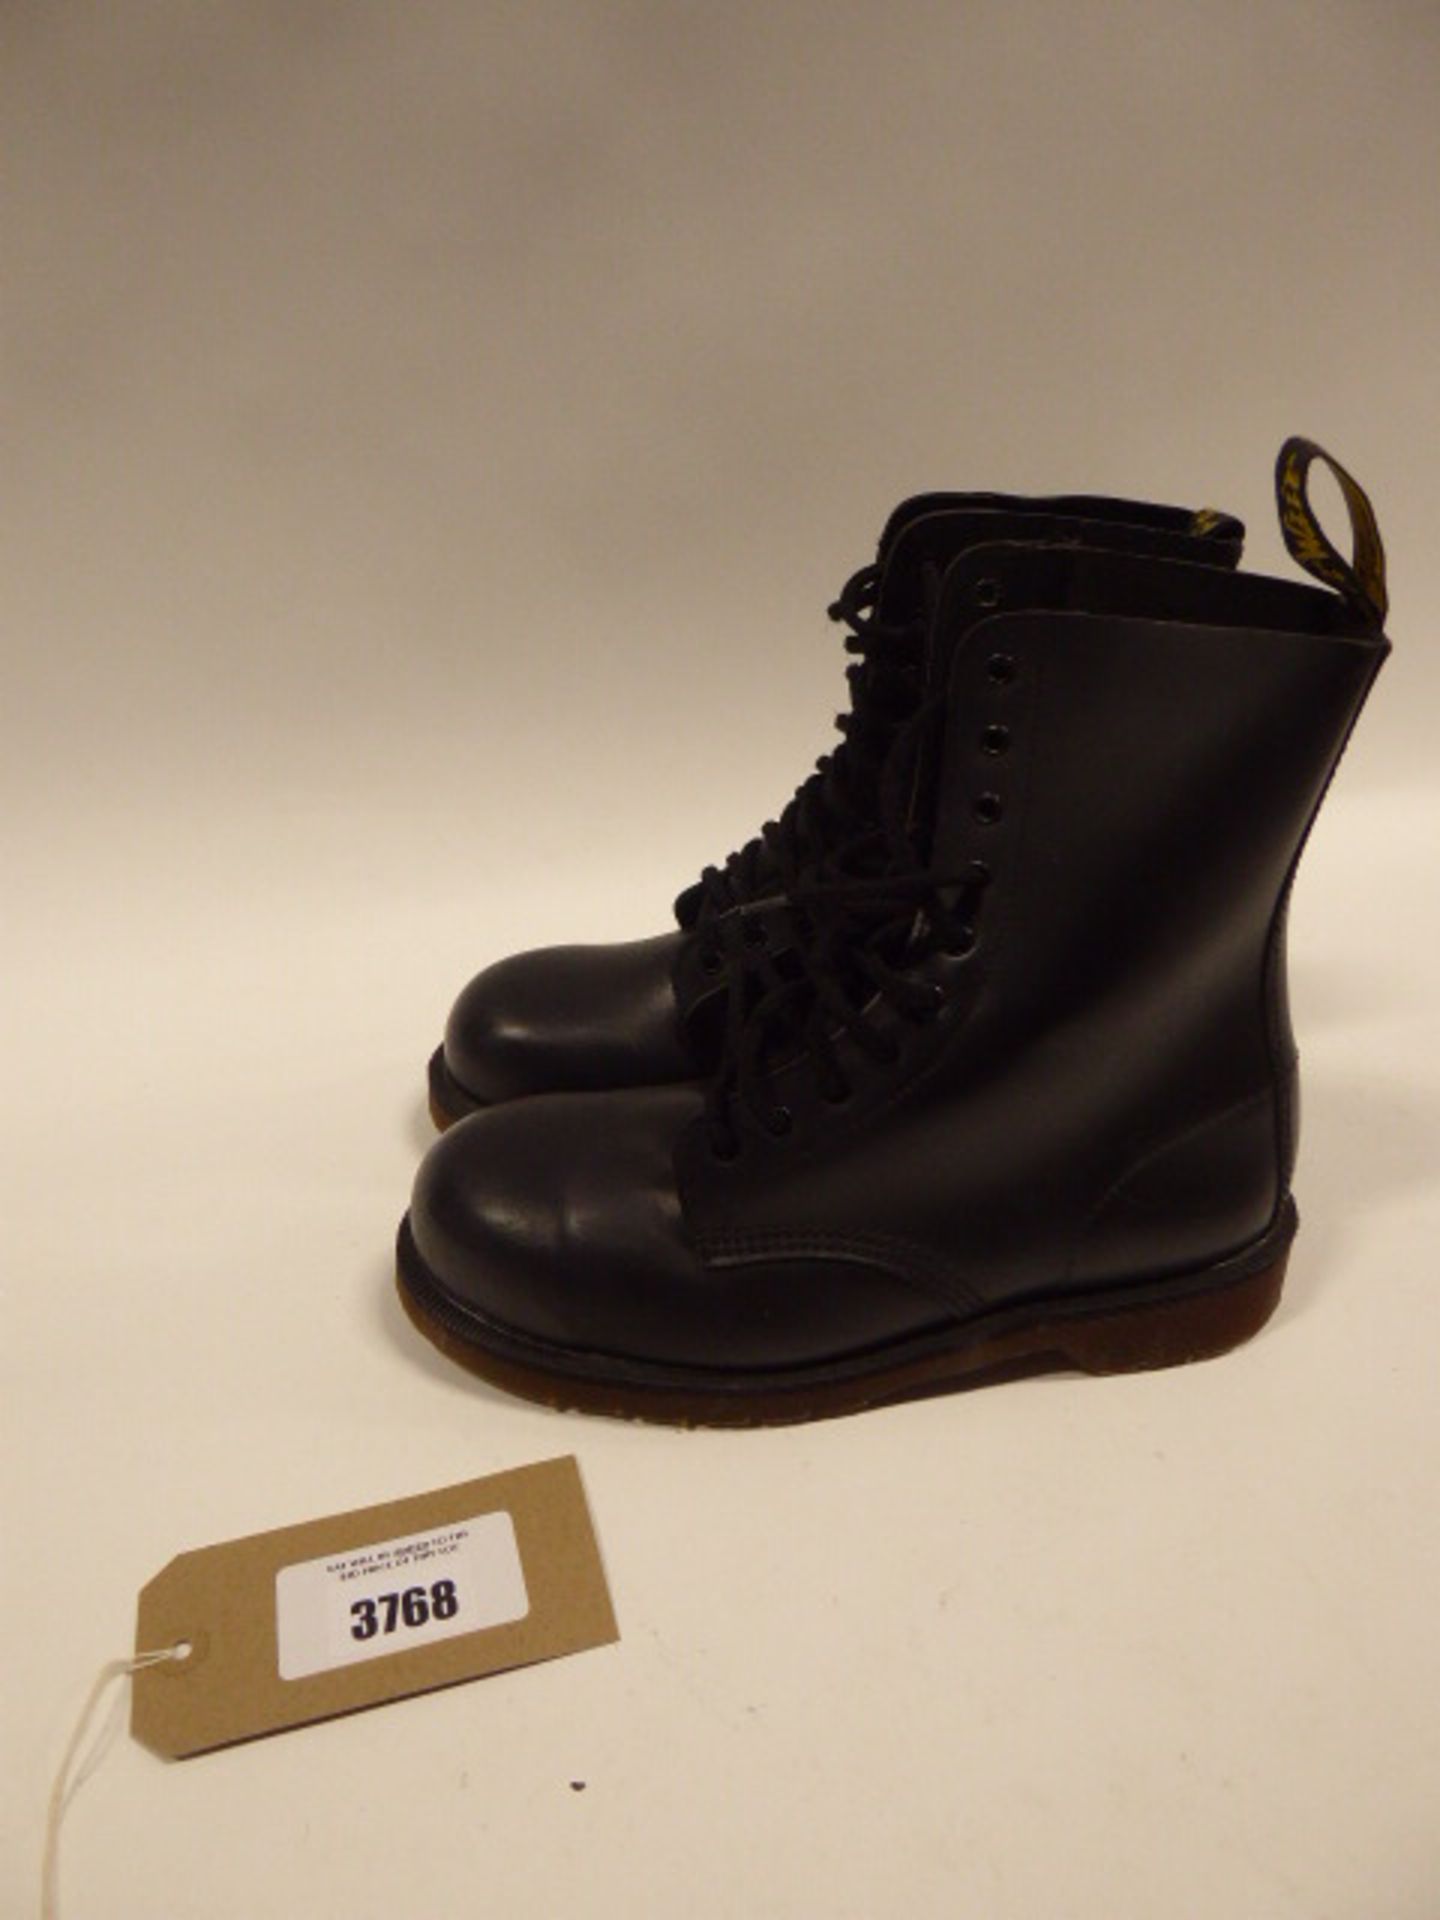 Dr Martens AirWair ankle boots size 8 (used)